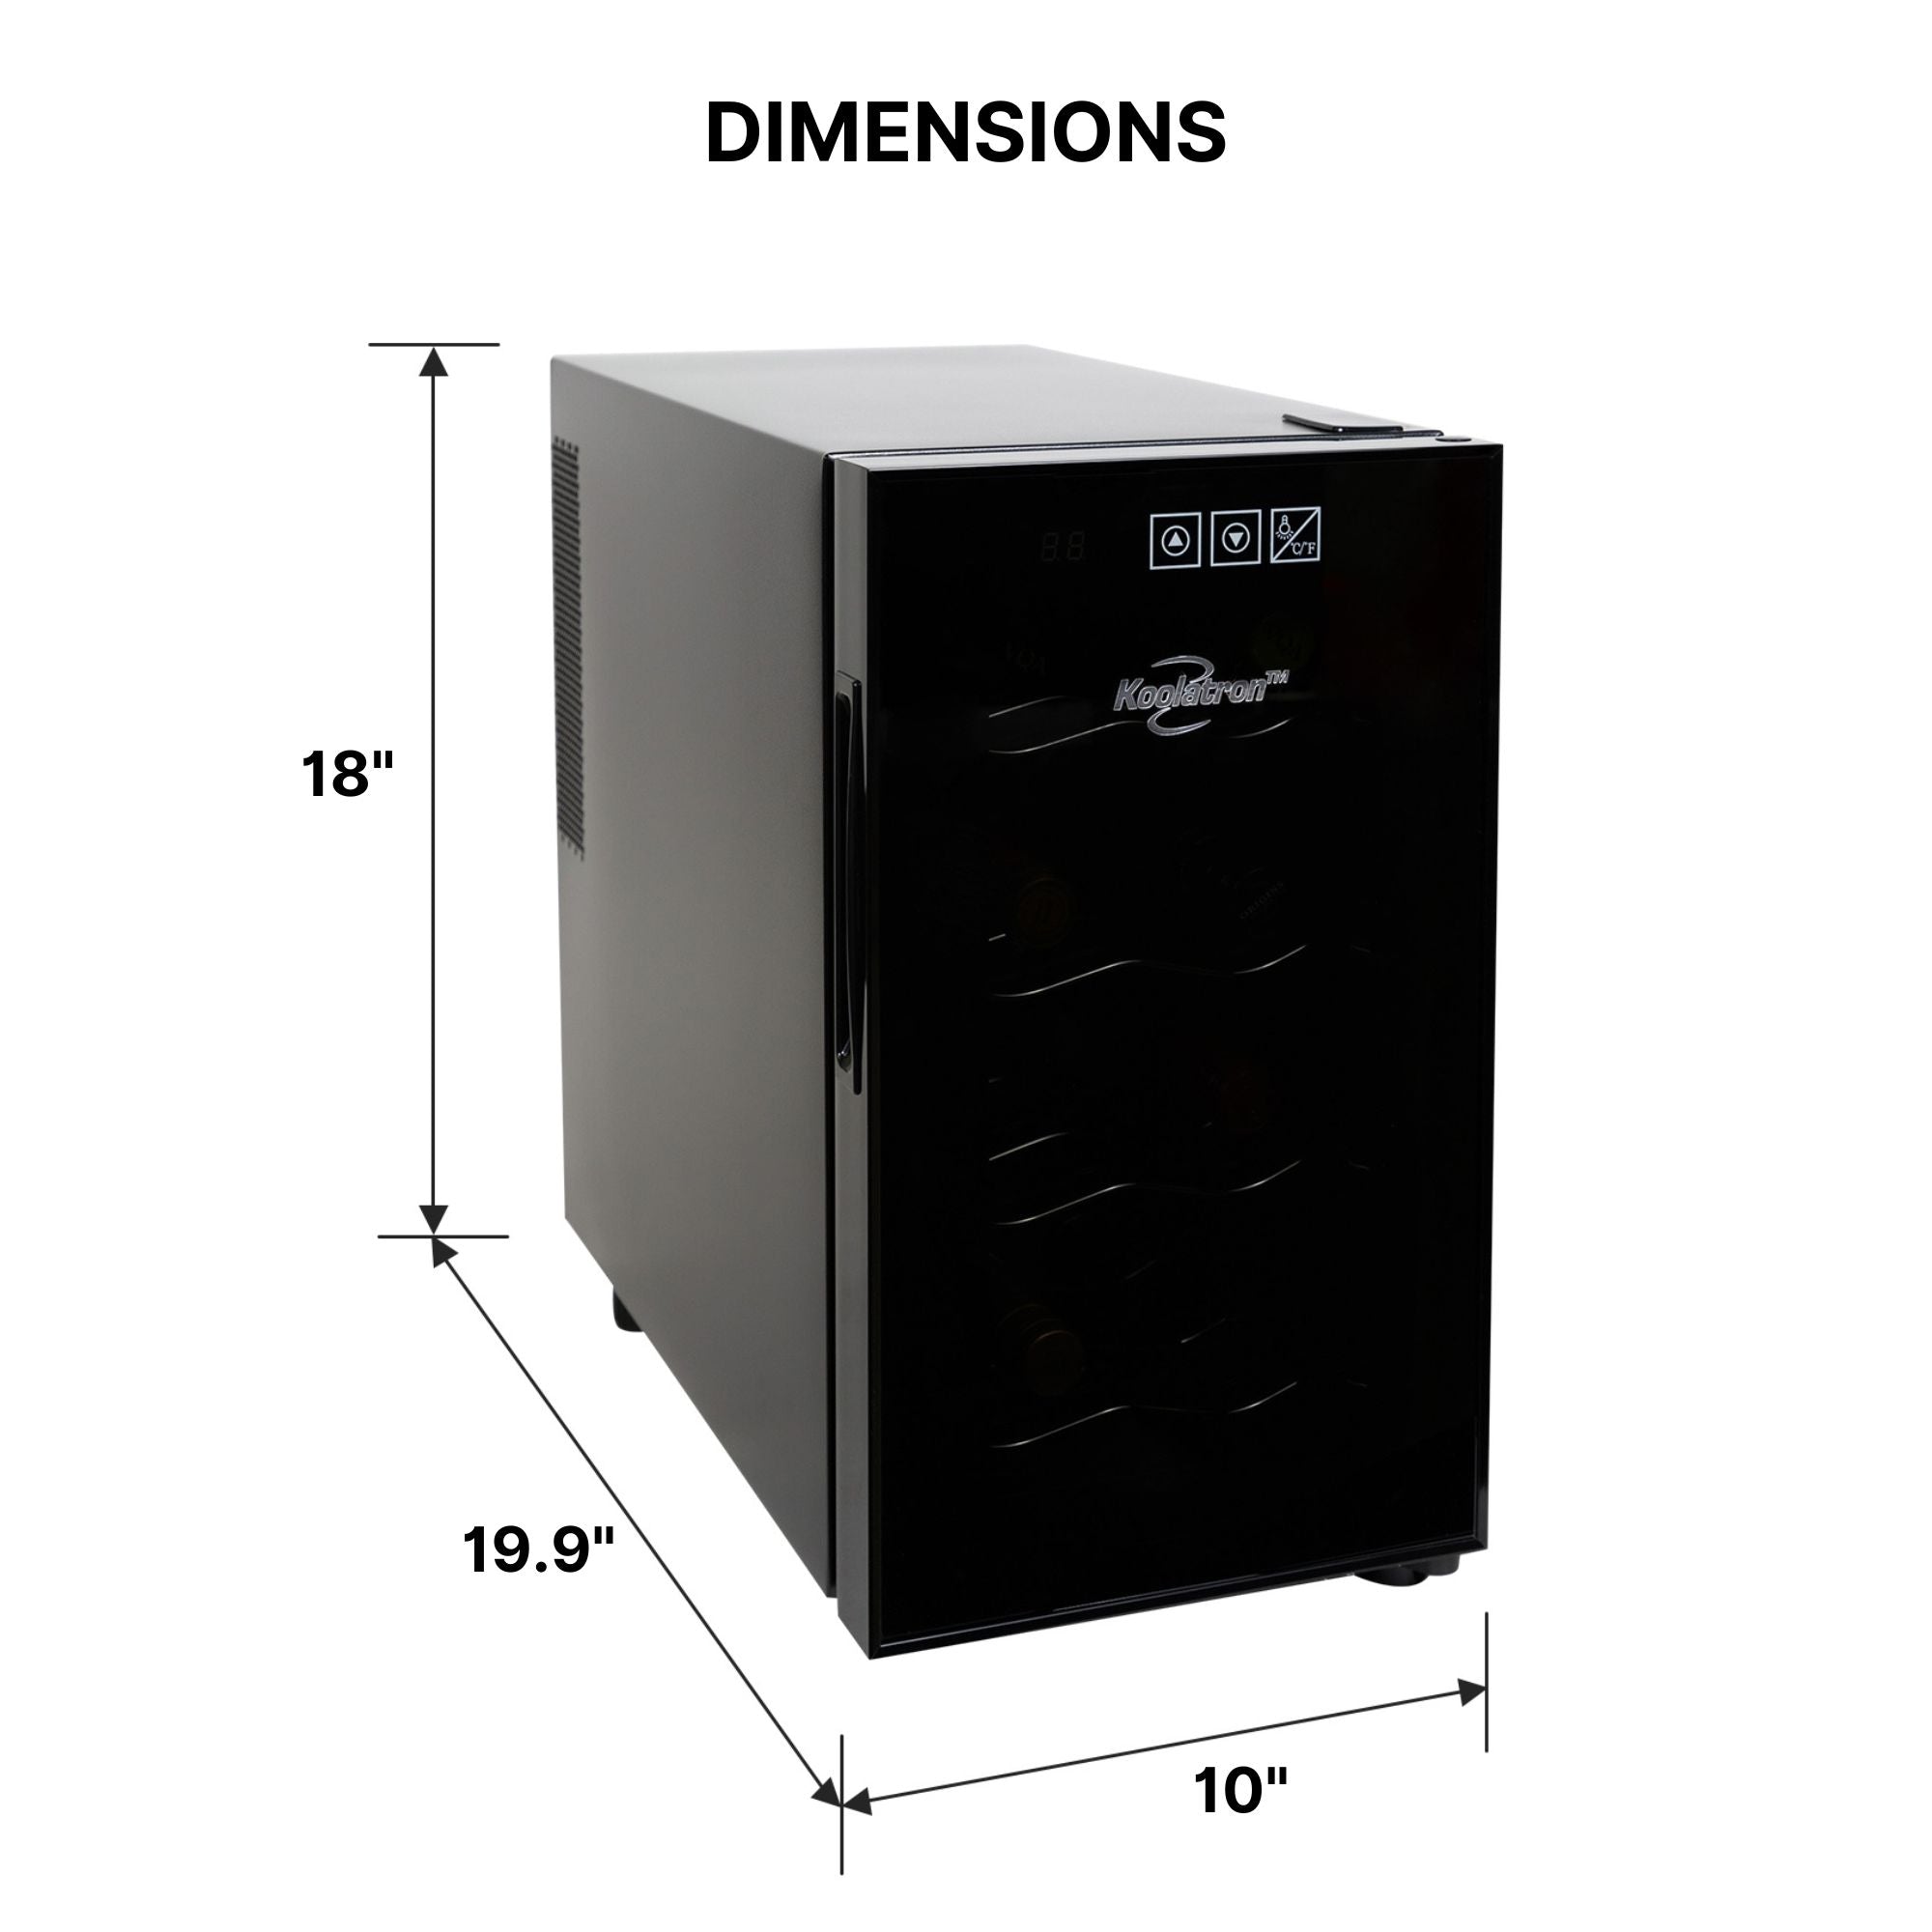 Koolatron 8 bottle thermoelectric wine fridge on a white background with dimensions labeled